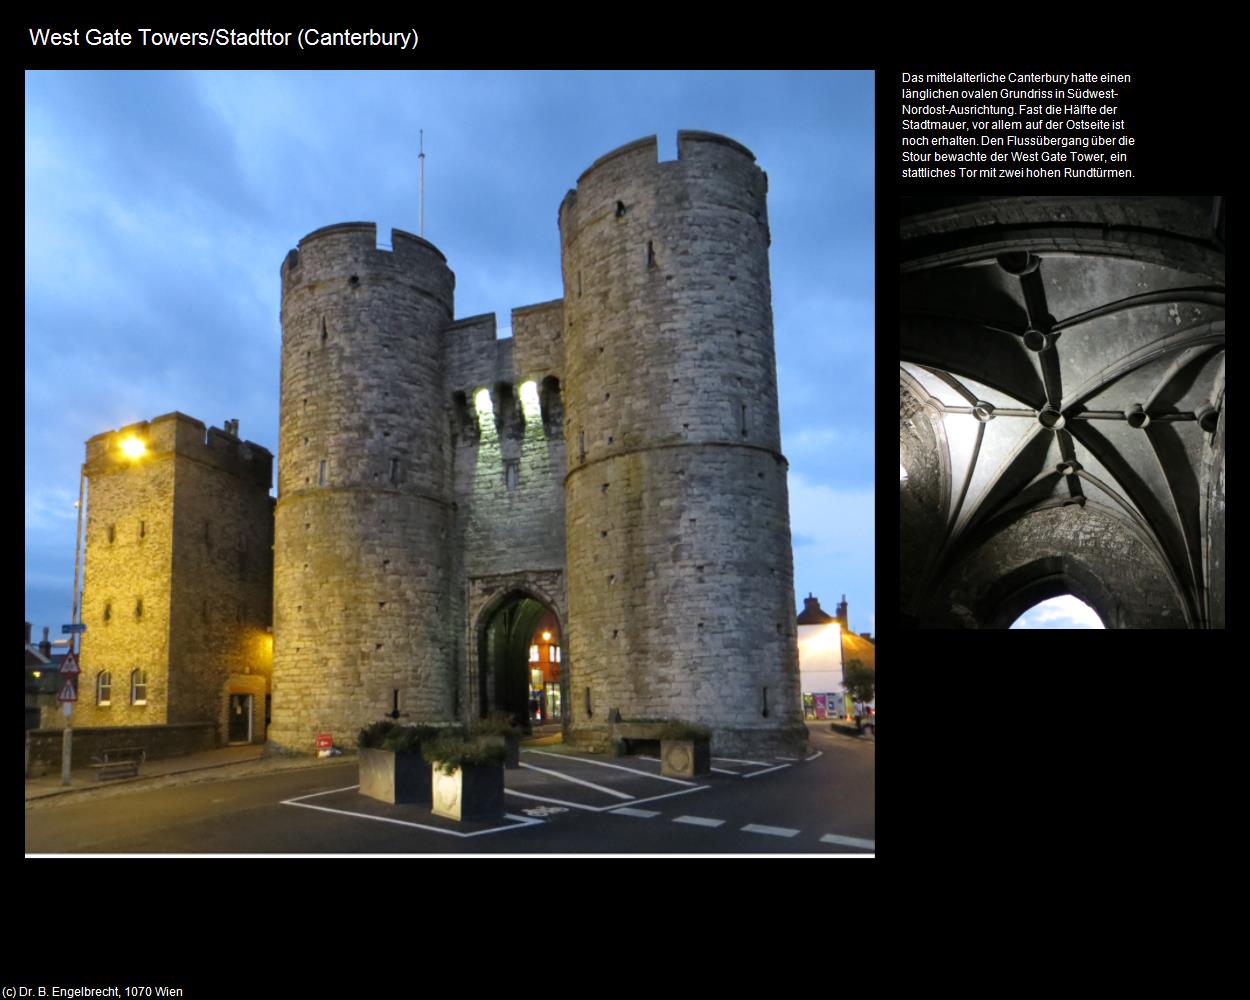 West Gate Towers/Stadttor (Canterbury, England) in Kulturatlas-ENGLAND und WALES